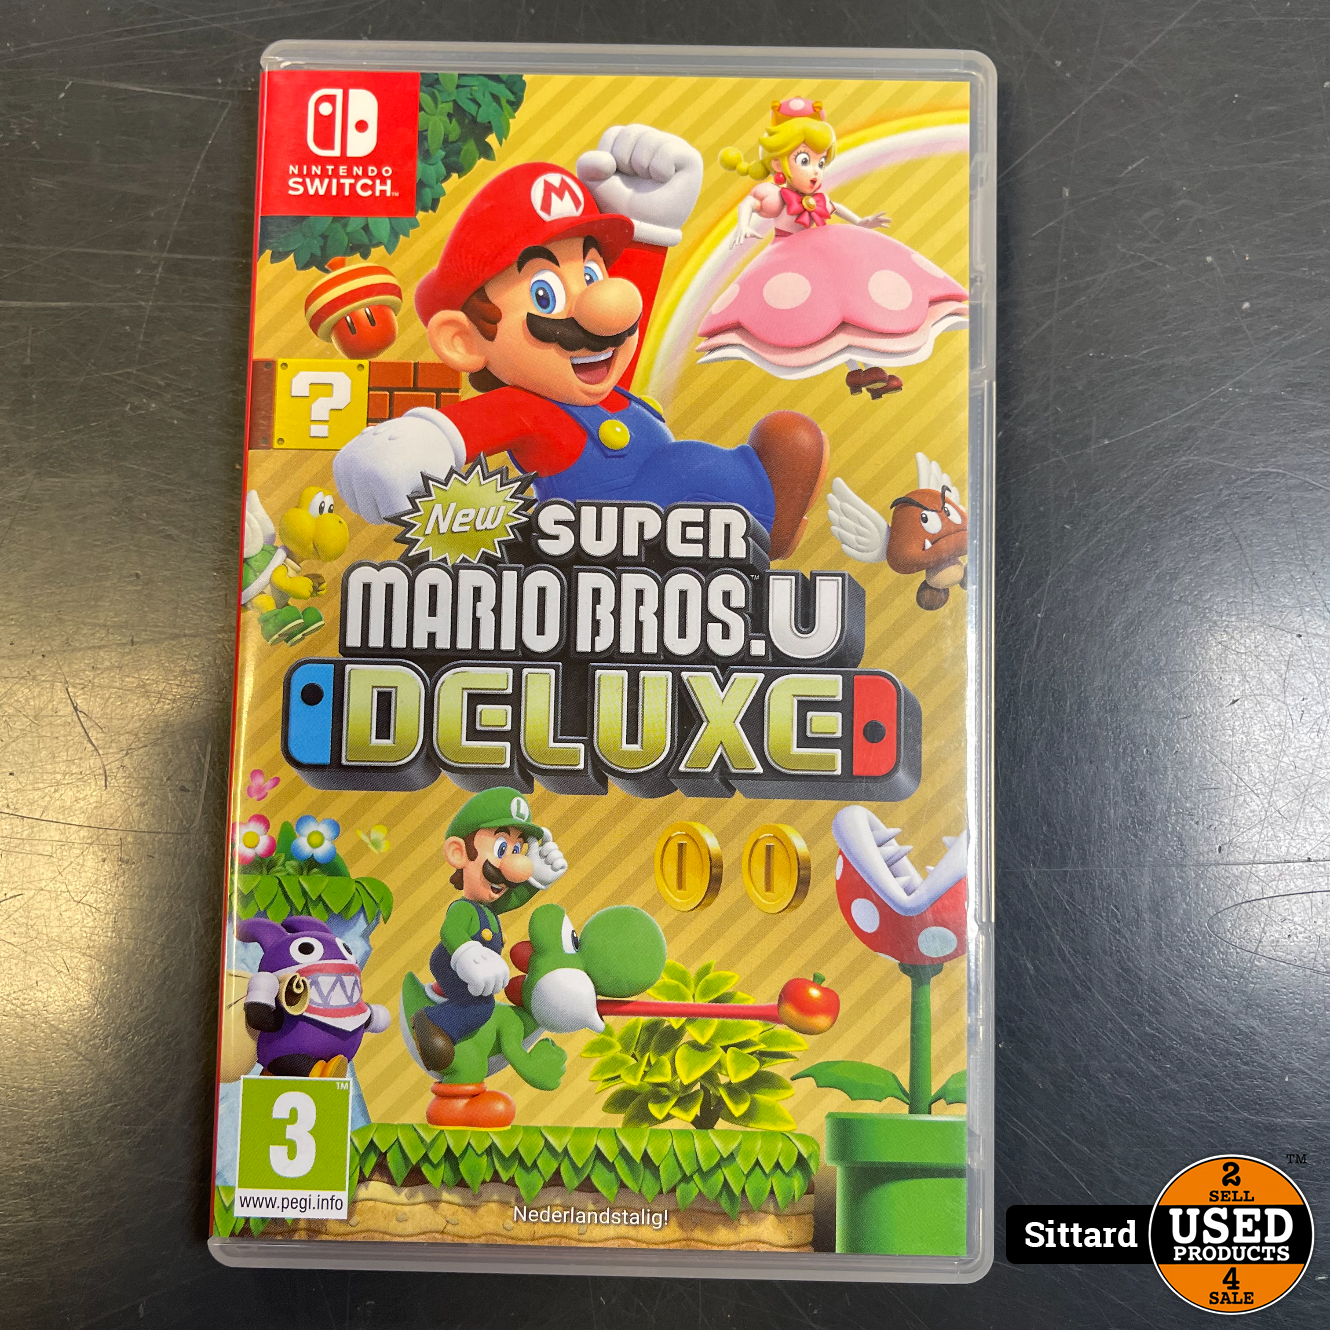 Australische persoon kapok capaciteit Nintendo Switch Game - New Super Mario Bros Deluxe | Nwpr. 59,98 Euro -  Used Products Sittard